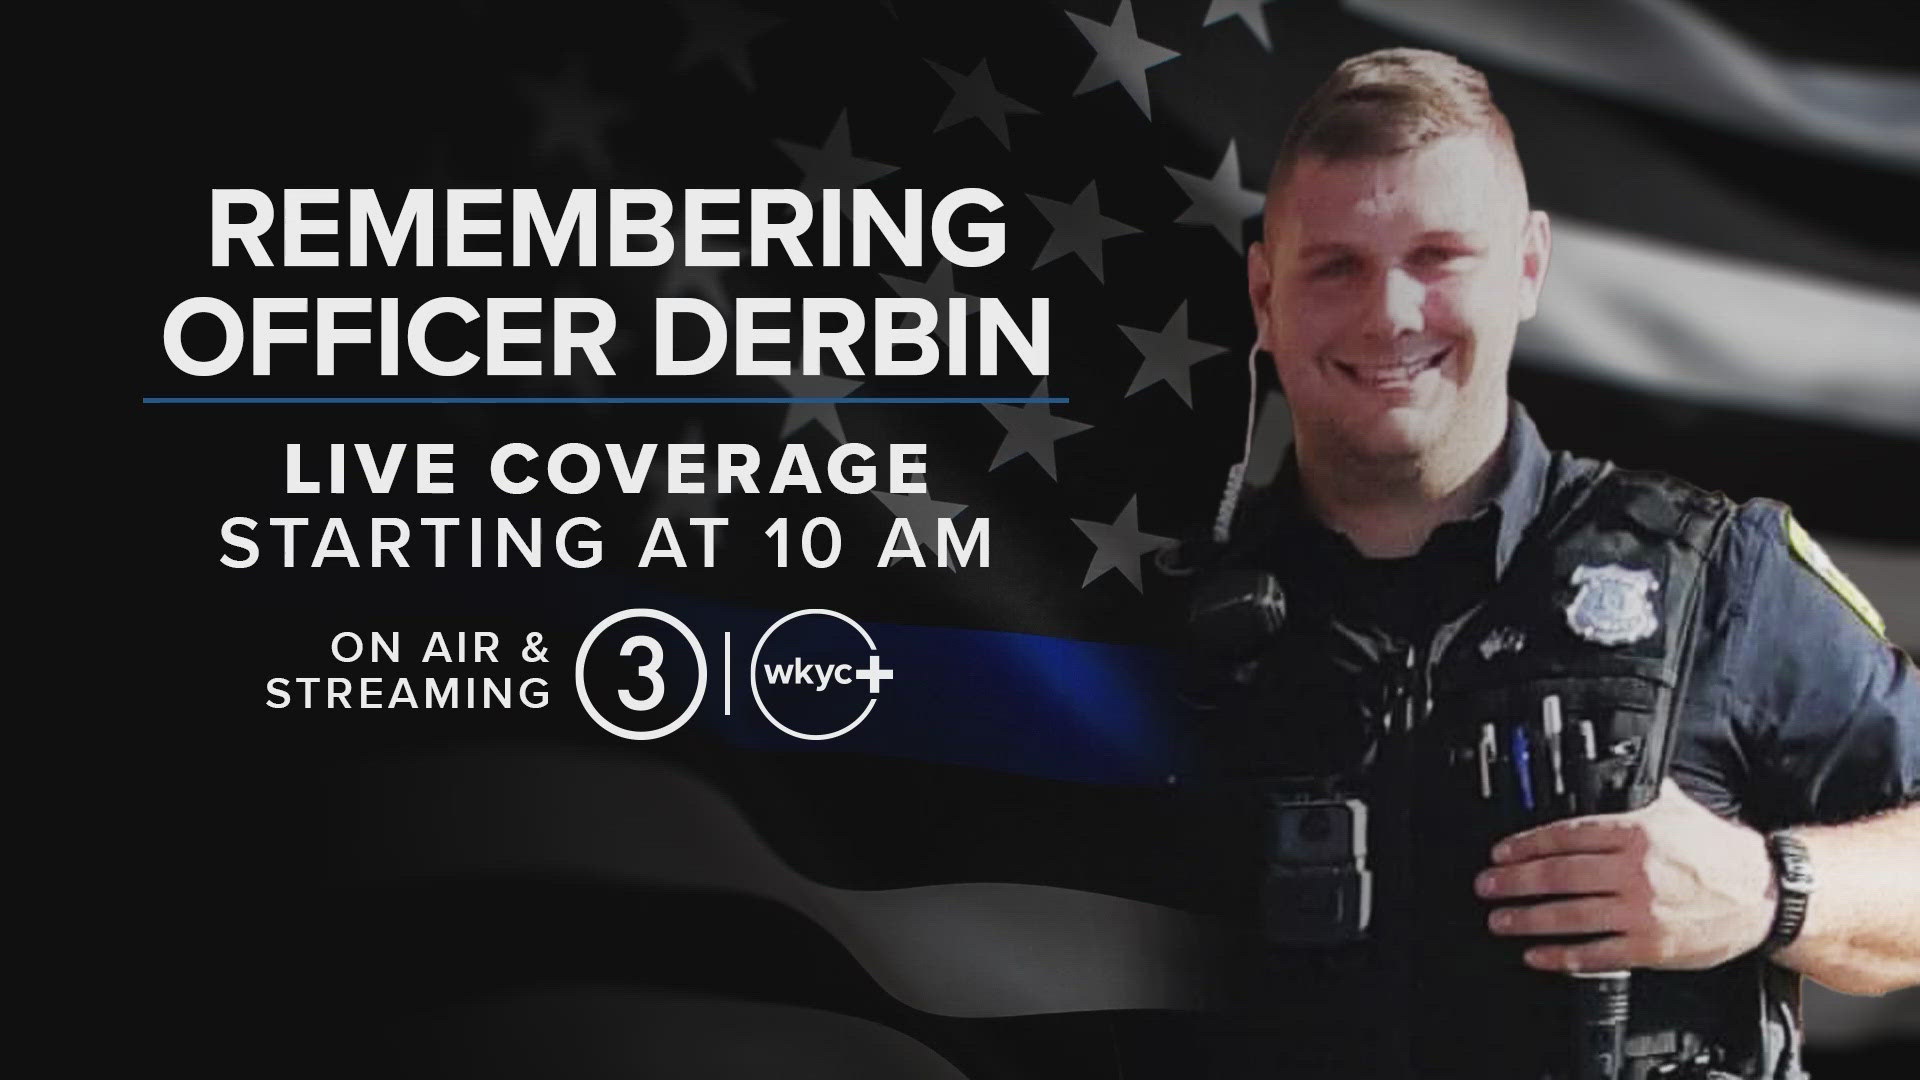 The community is gathering to pay their respects for Euclid police officer Jacob Derbin one week after he was shot and killed in the line of duty.